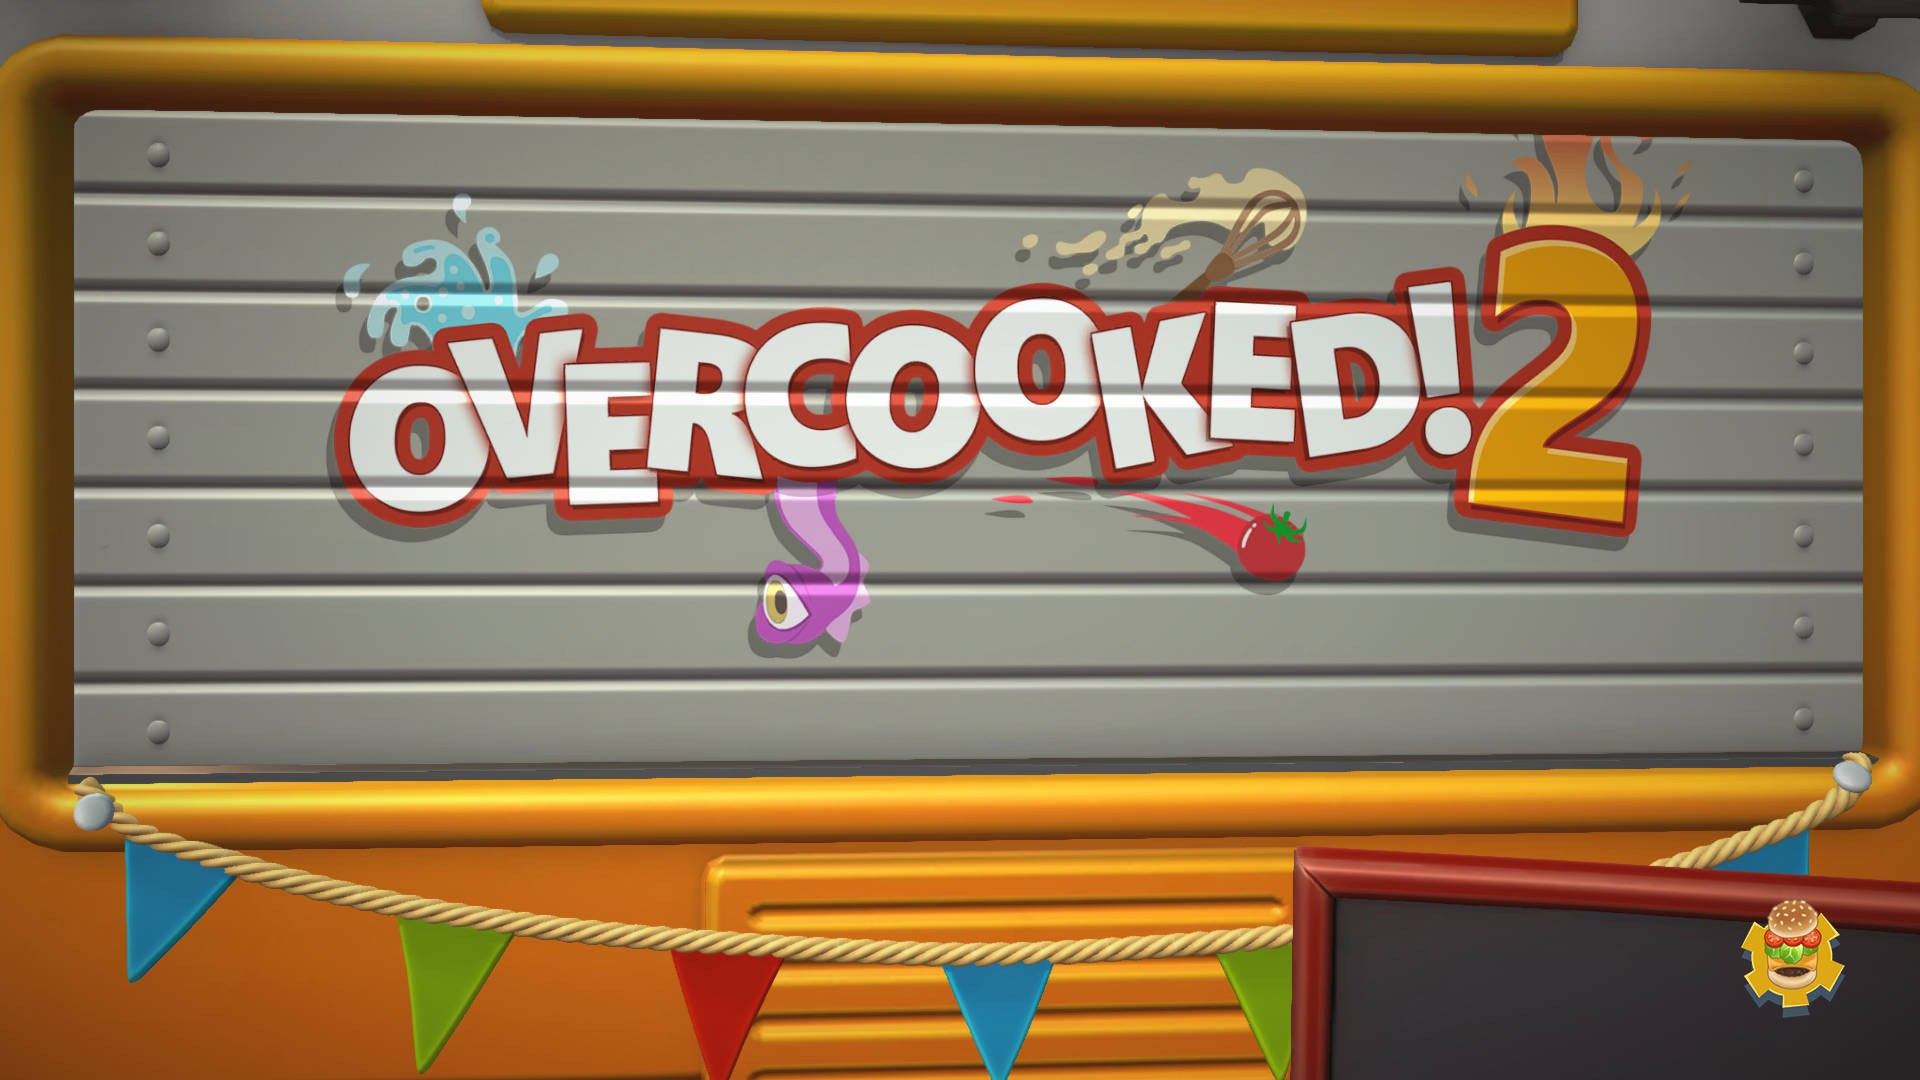 Overcooked 2 Truck Roll Up Background